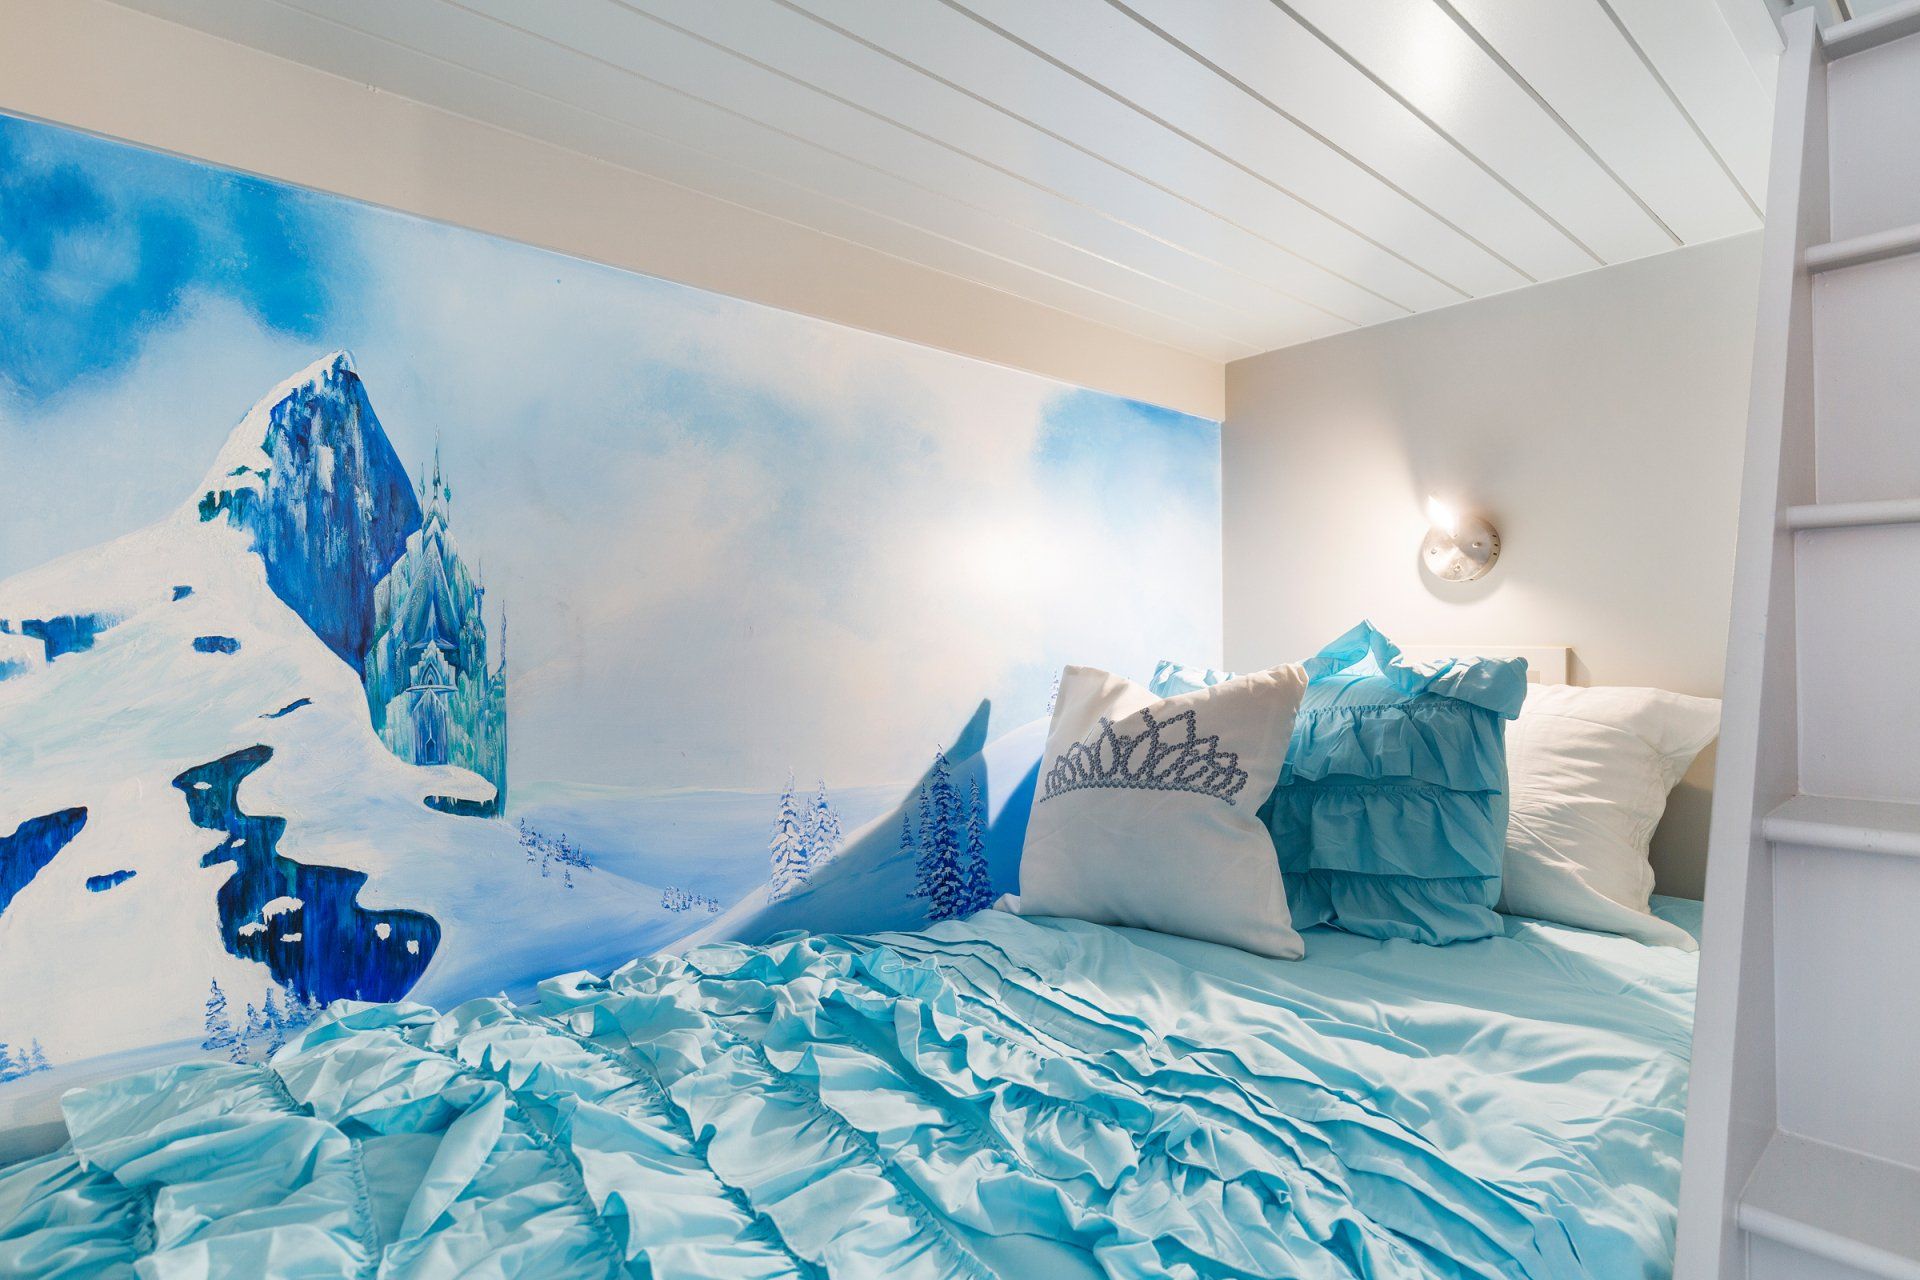 a bed with blue sheets and pillows in a bedroom with a frozen theme